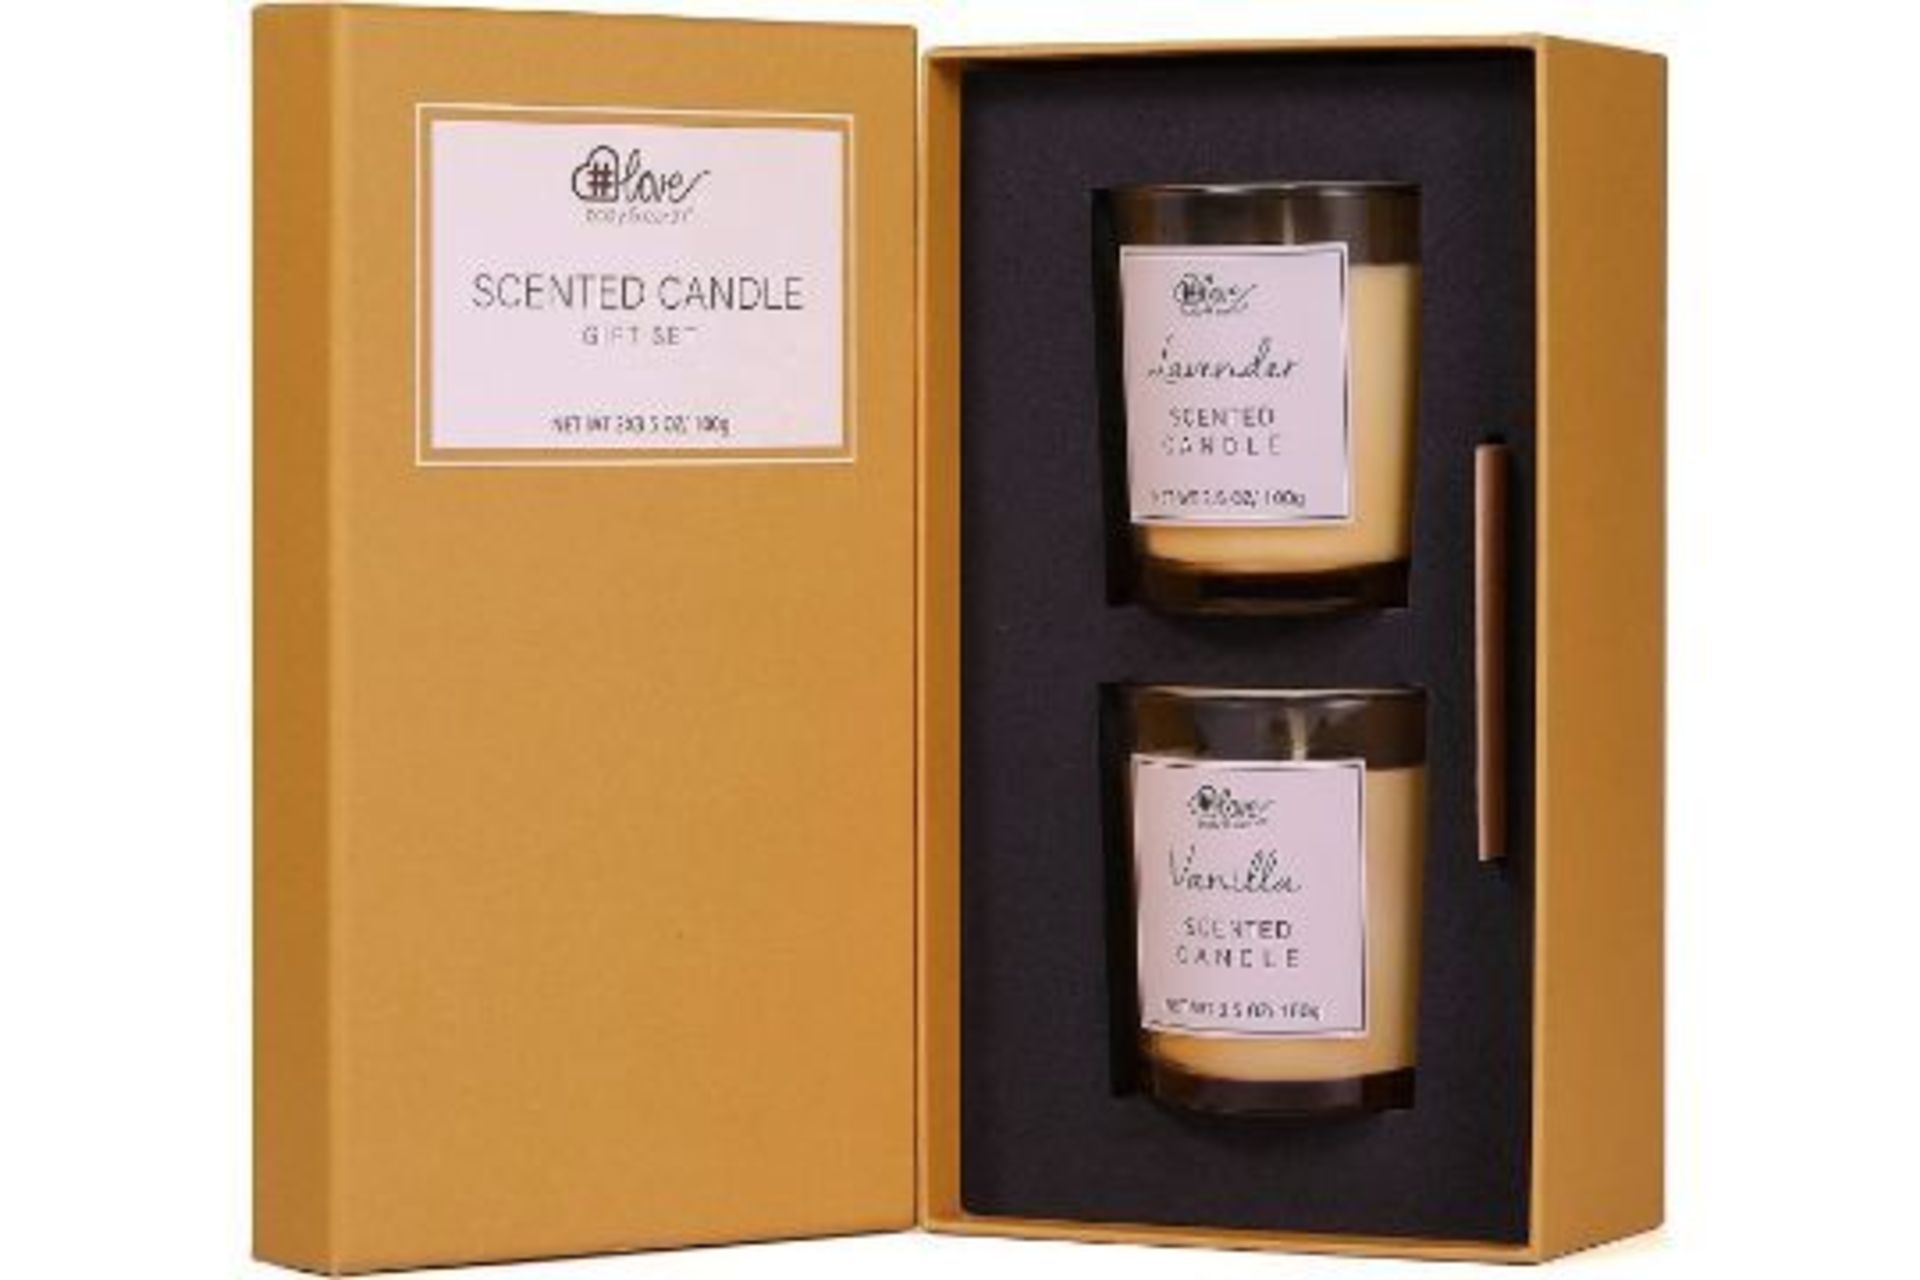 10 x New Boxed Sets of 2 Scented Candle. (SKU:BEL-SC-02-ROW14). 2 FRAGRANCE SCENTS: This scented